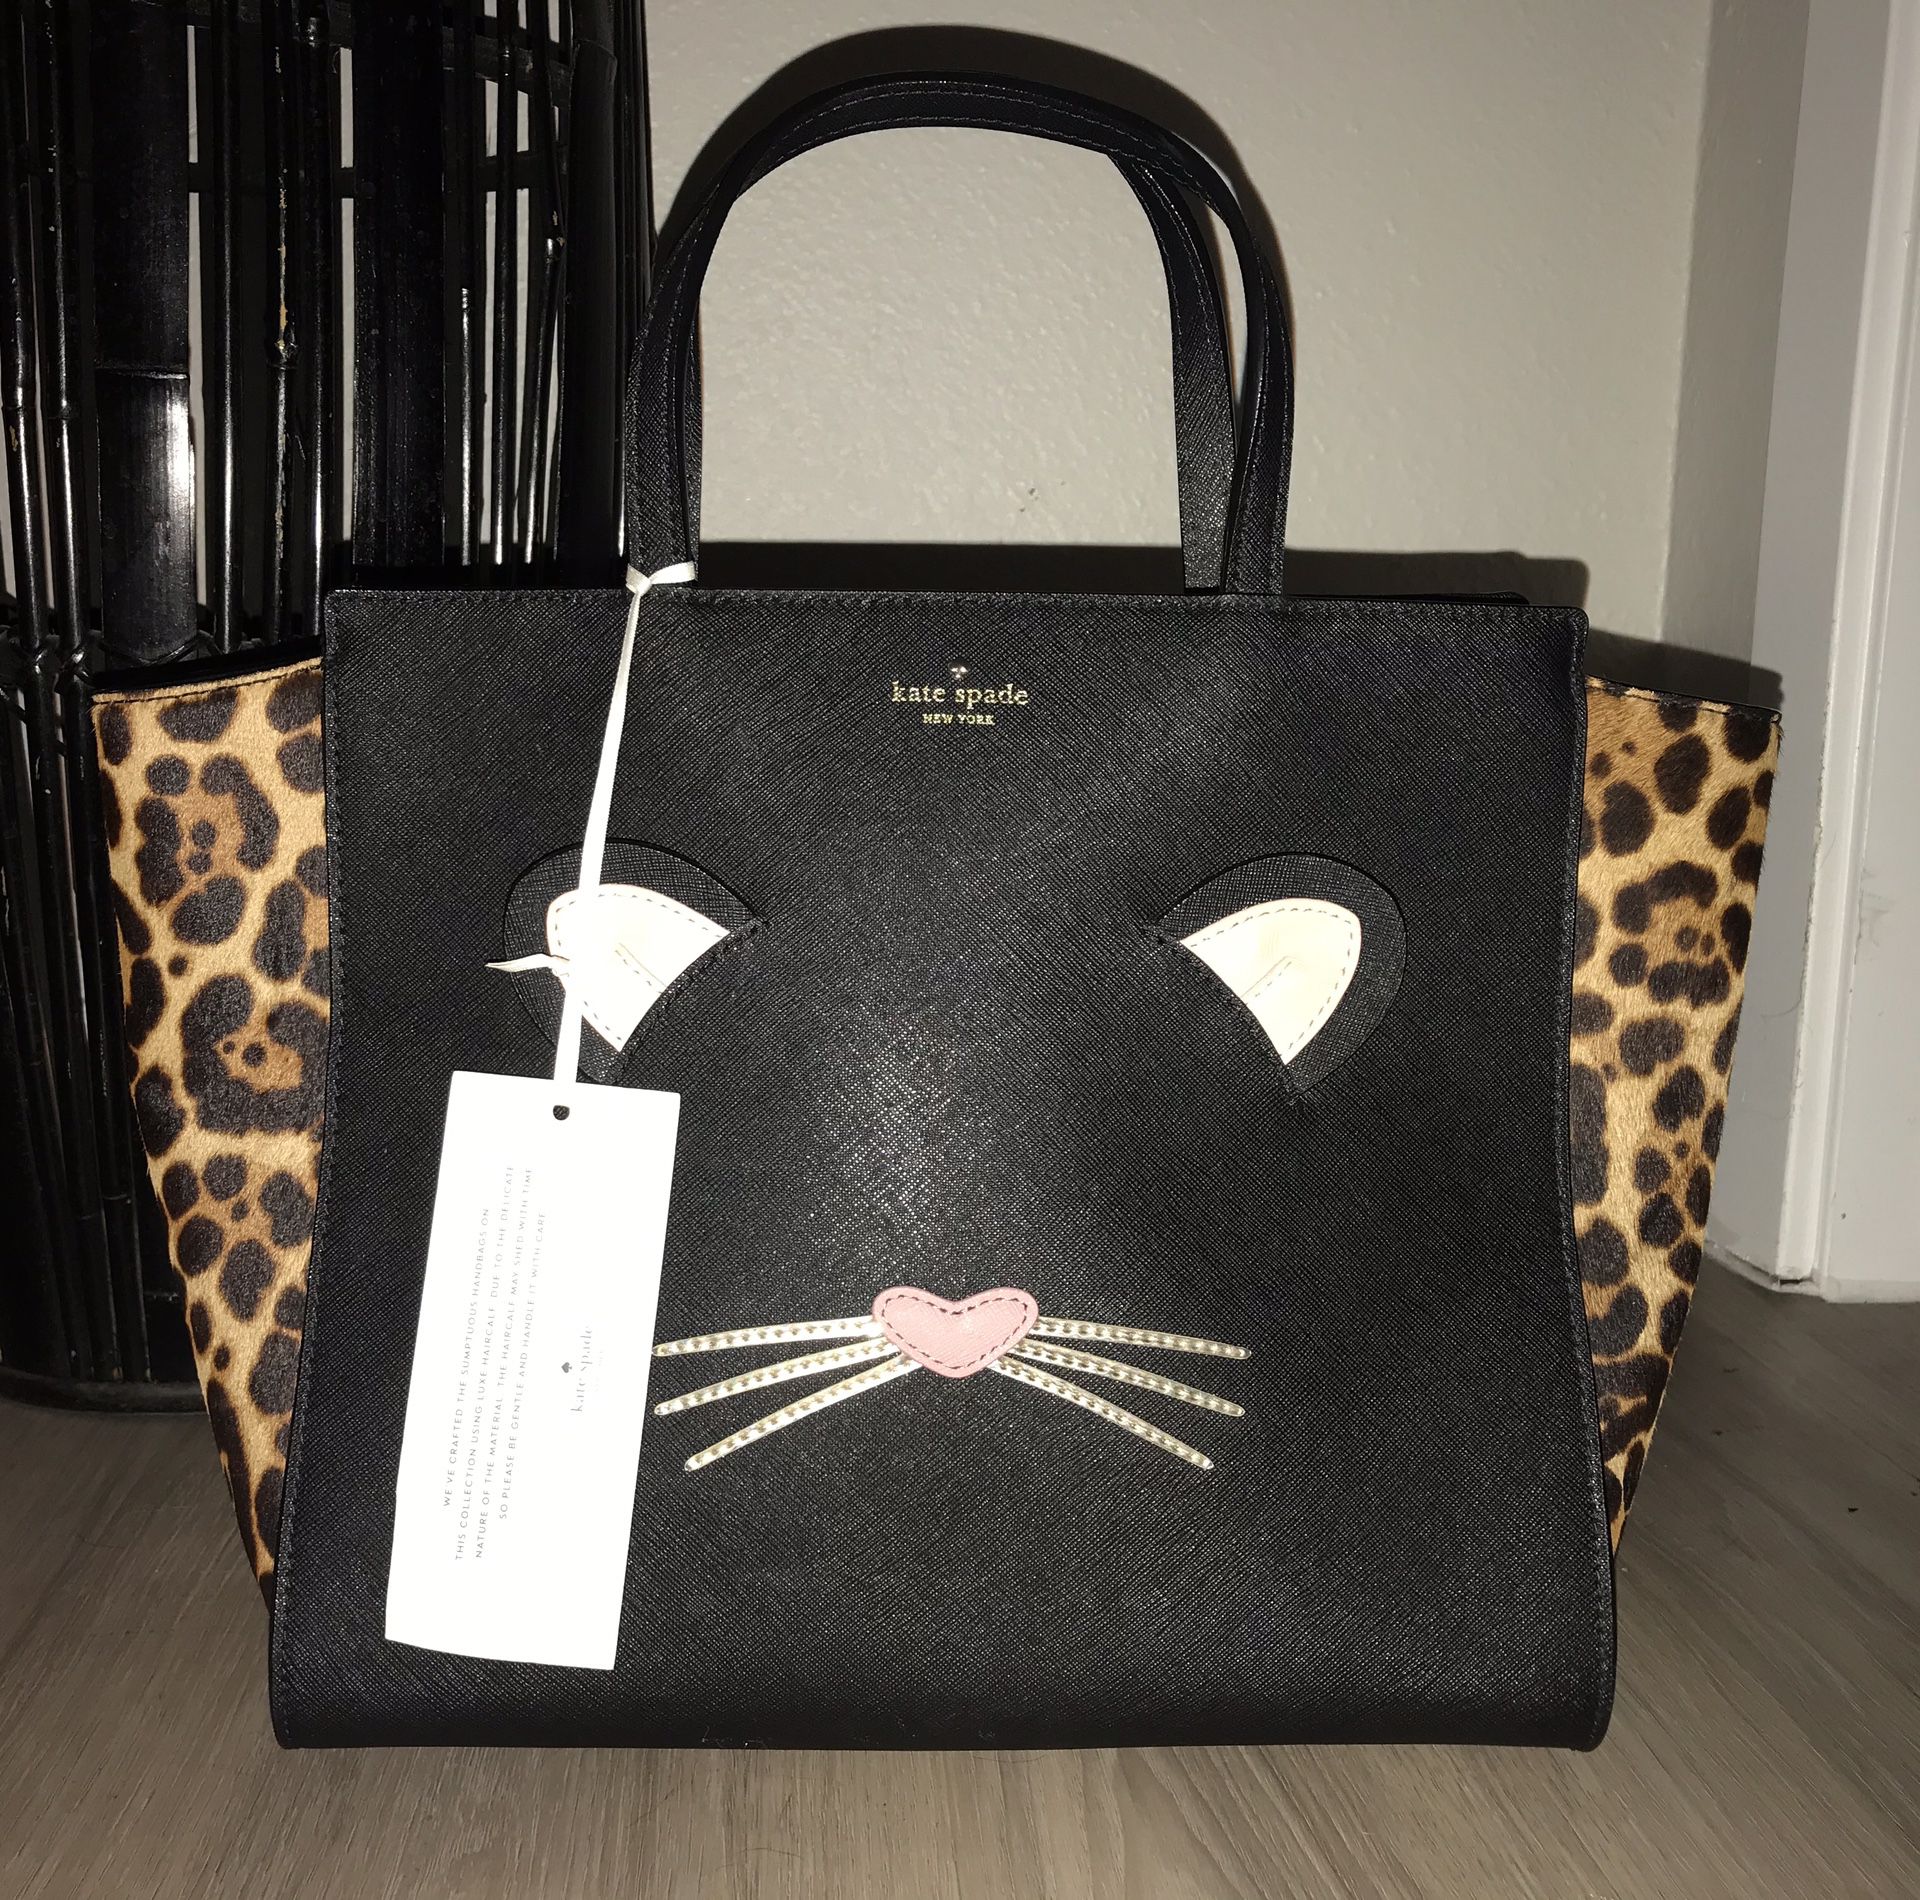 Authentic Kate Spade Cat’s Meow Bag with Calf Leopard Hair - Brand New for  Sale in Groom Creek, AZ - OfferUp